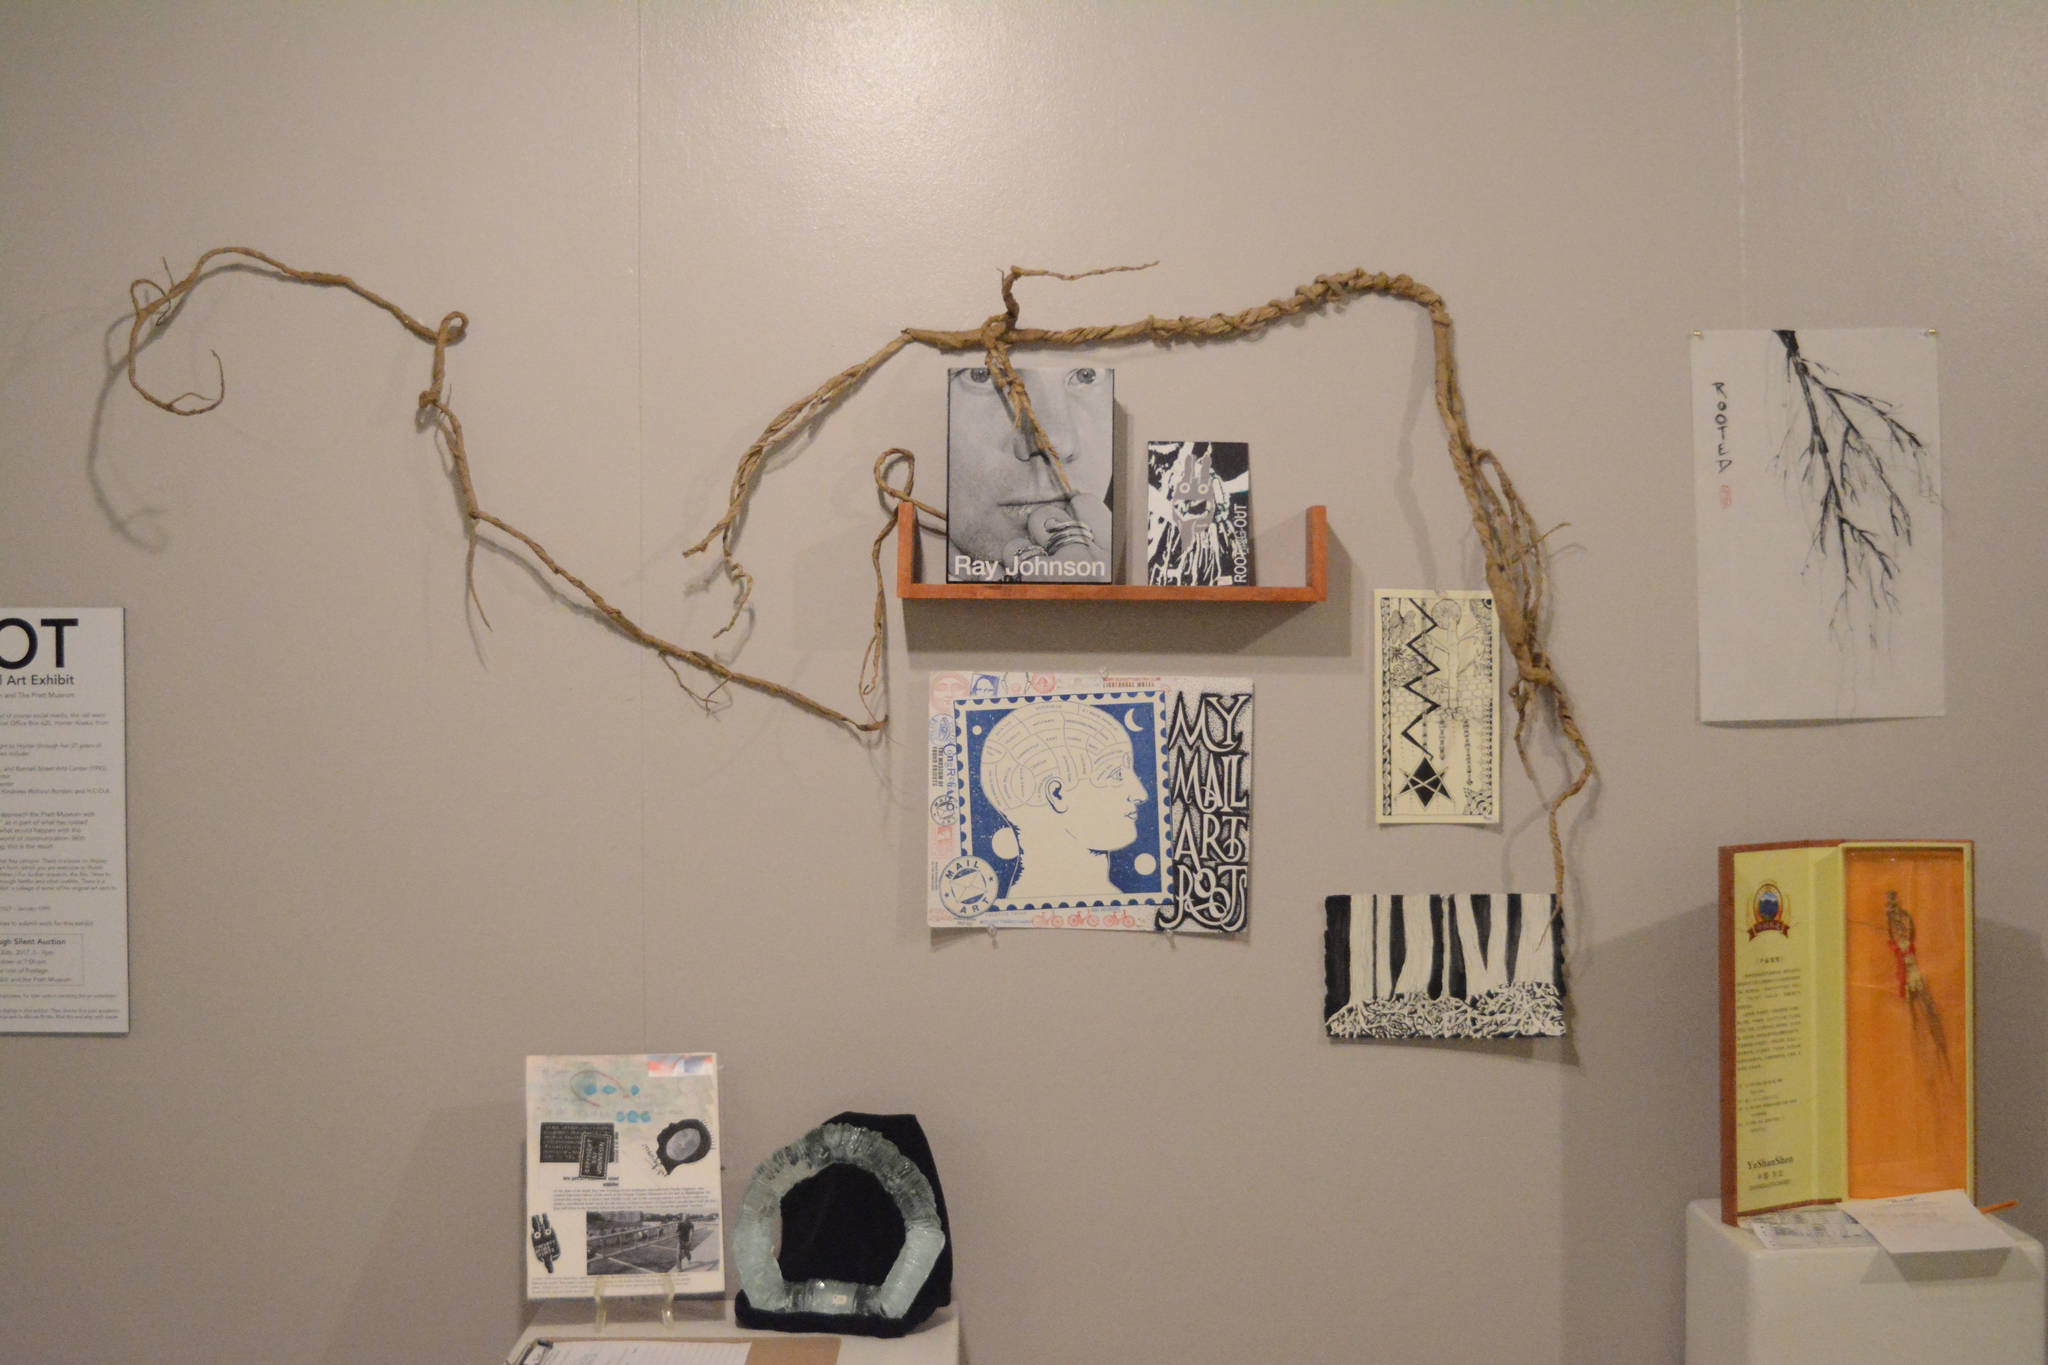 Some of the mail art in the Root show at the Pratt Museum. (Photo by Michael Armstrong, Homer News)